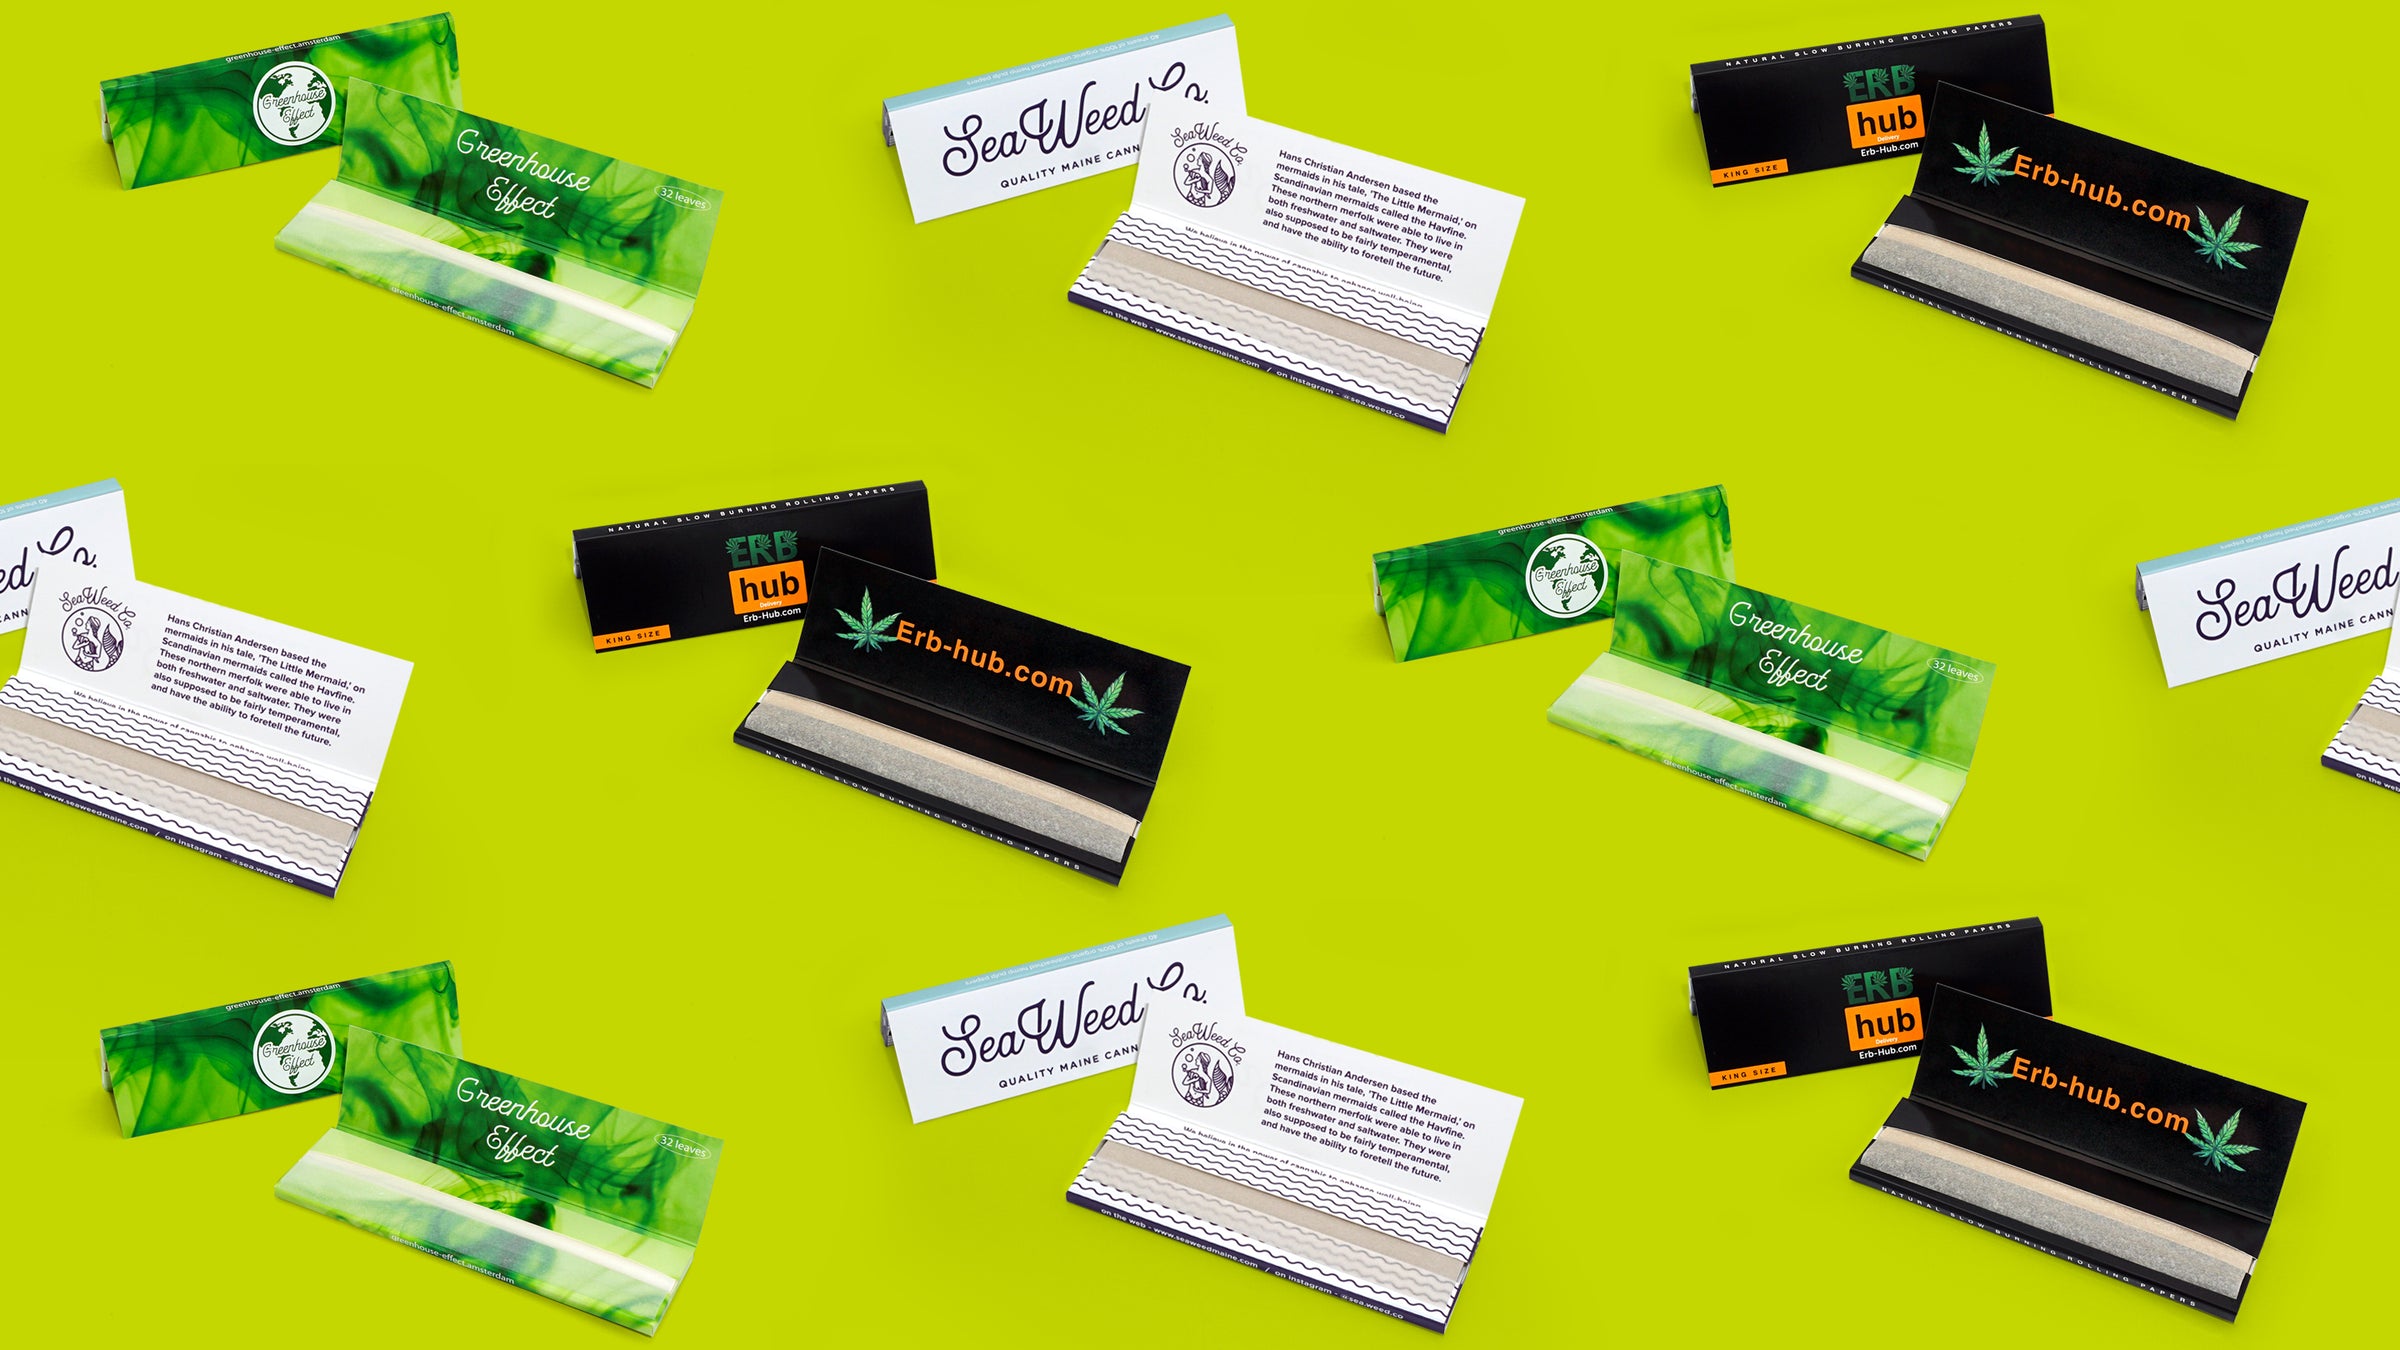 Rizla, Blue King Size Slim Rolling Papers 32 leaves per booklet - 50  booklets per display, Papers & Rolls, Rolling Equipment, HEADSHOP